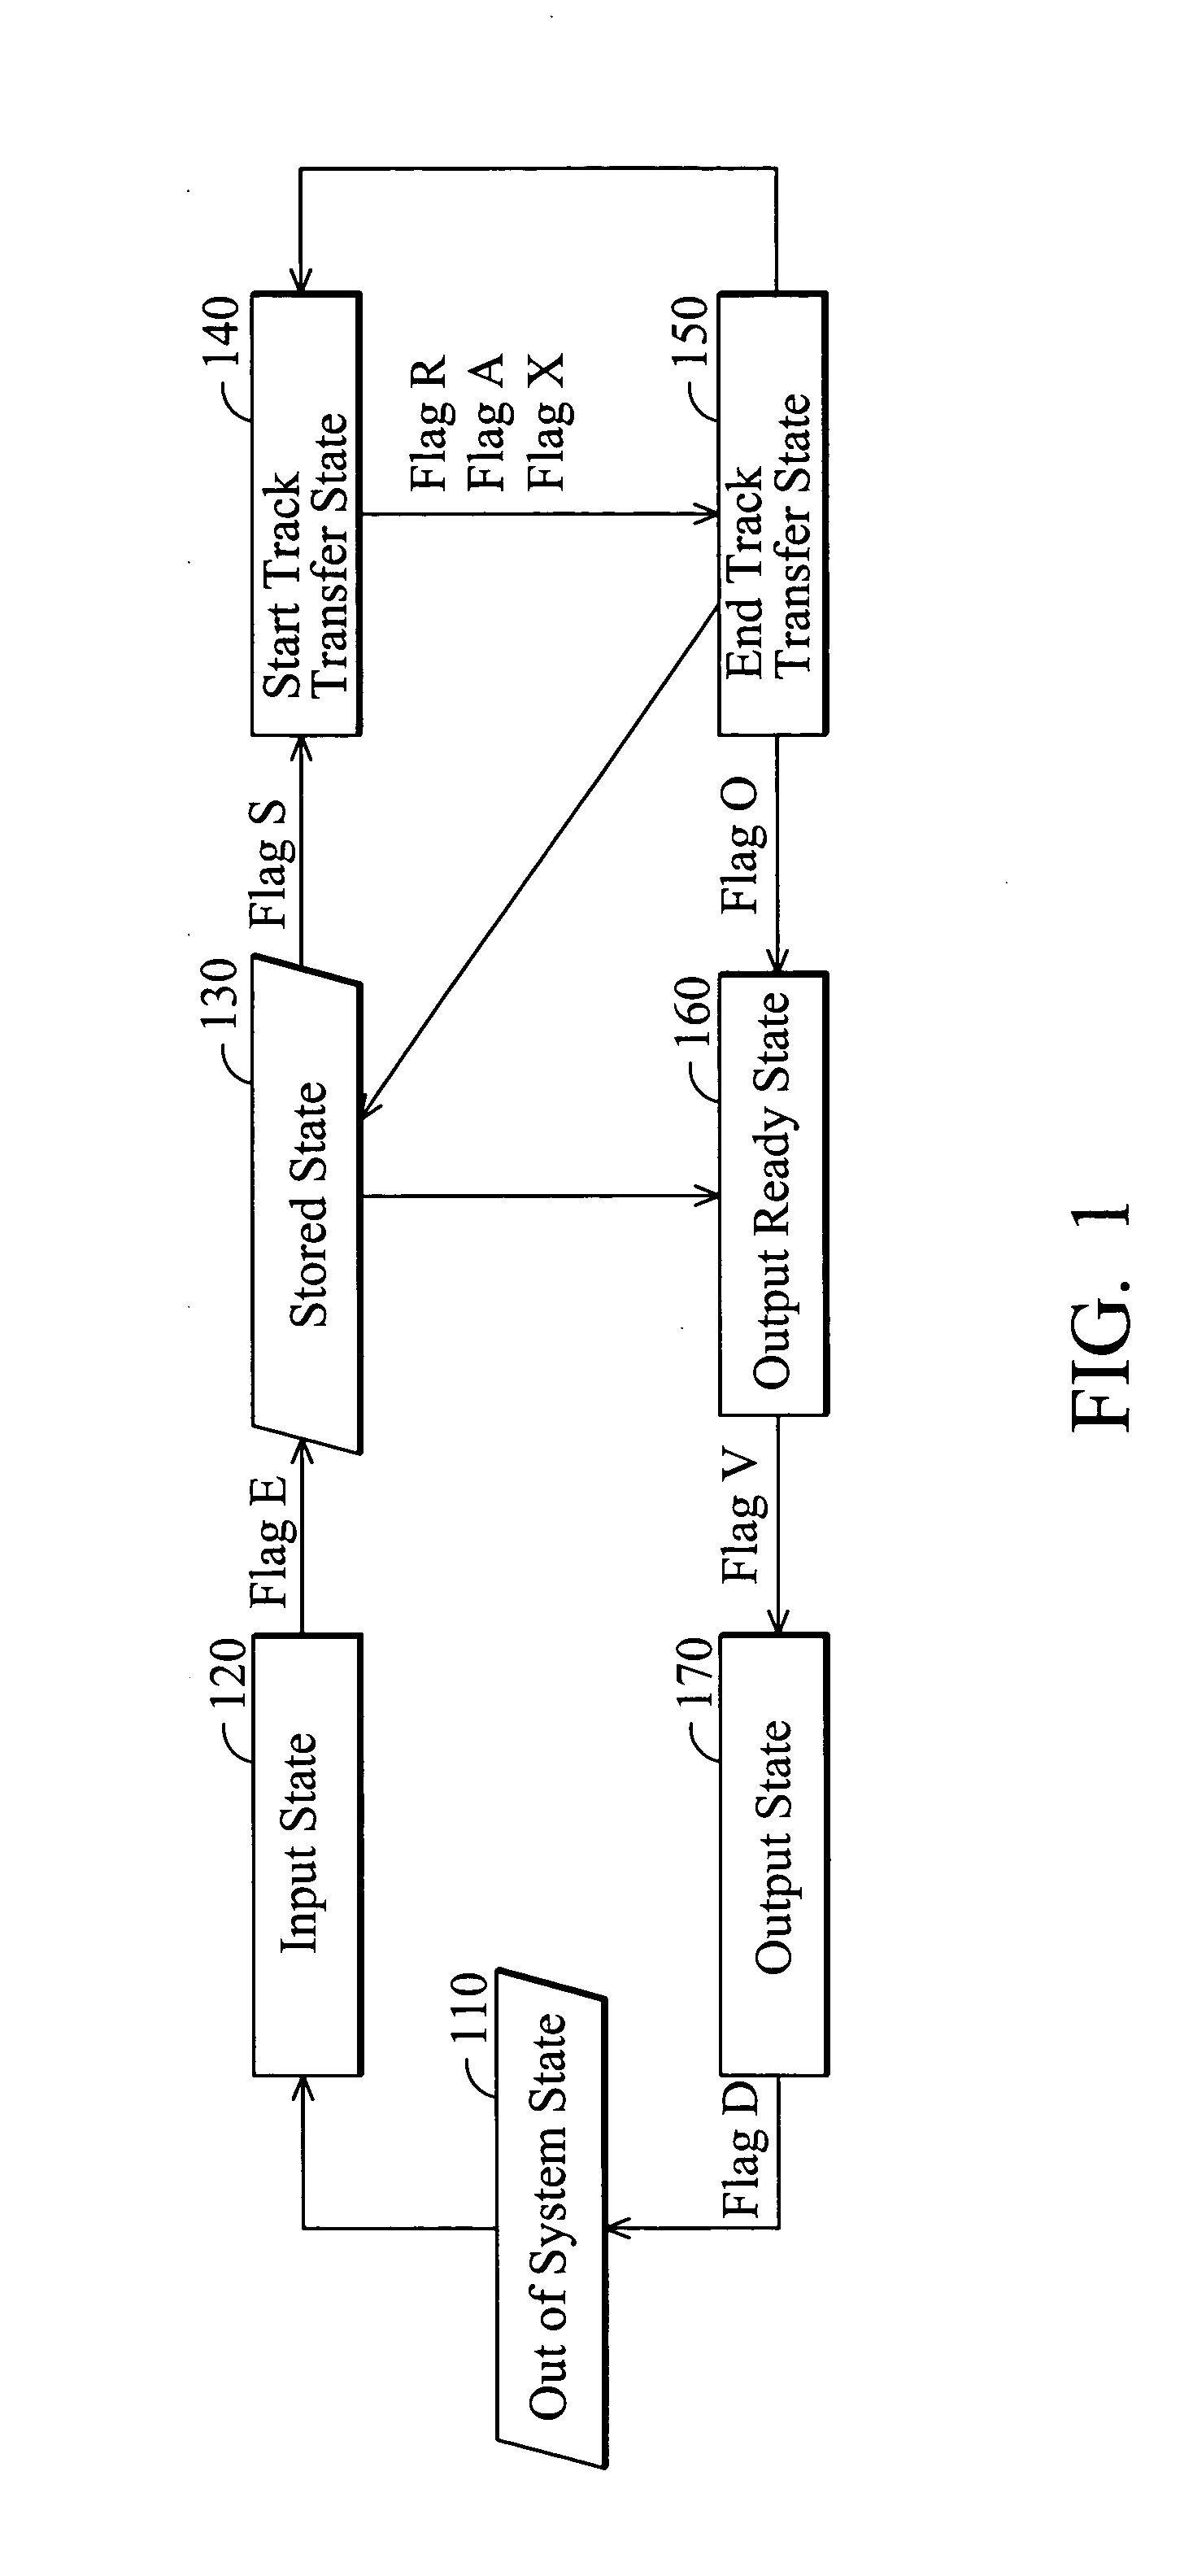 Material handling system enabling enhanced data consistency and method thereof